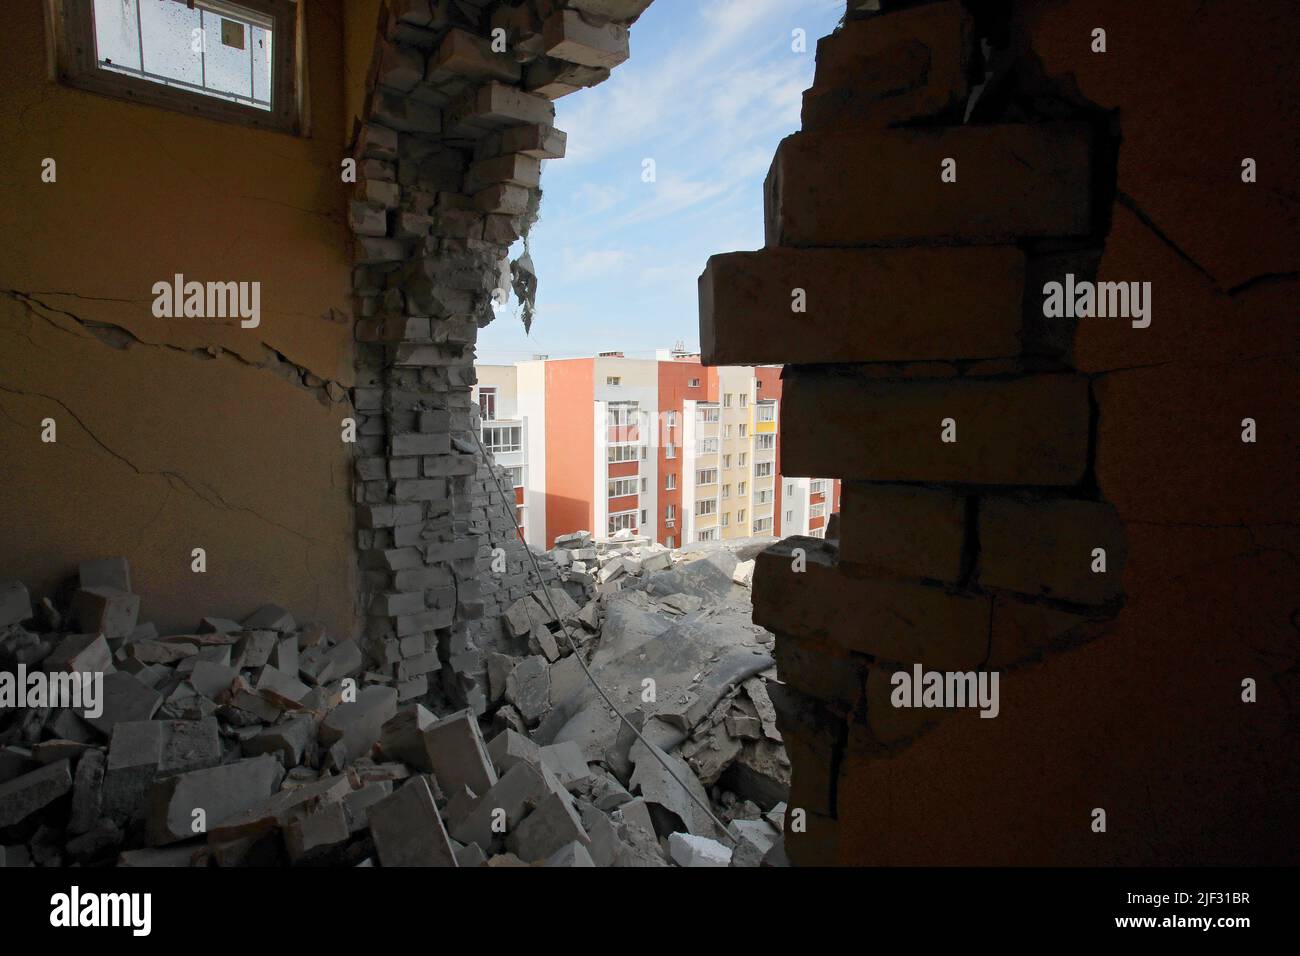 Non Exclusive: KHARKIV, UKRAINE - JUNE 26, 2022 - An apartment block is seen through a hole in the wall after the Russian troops shelled a northern ne Stock Photo